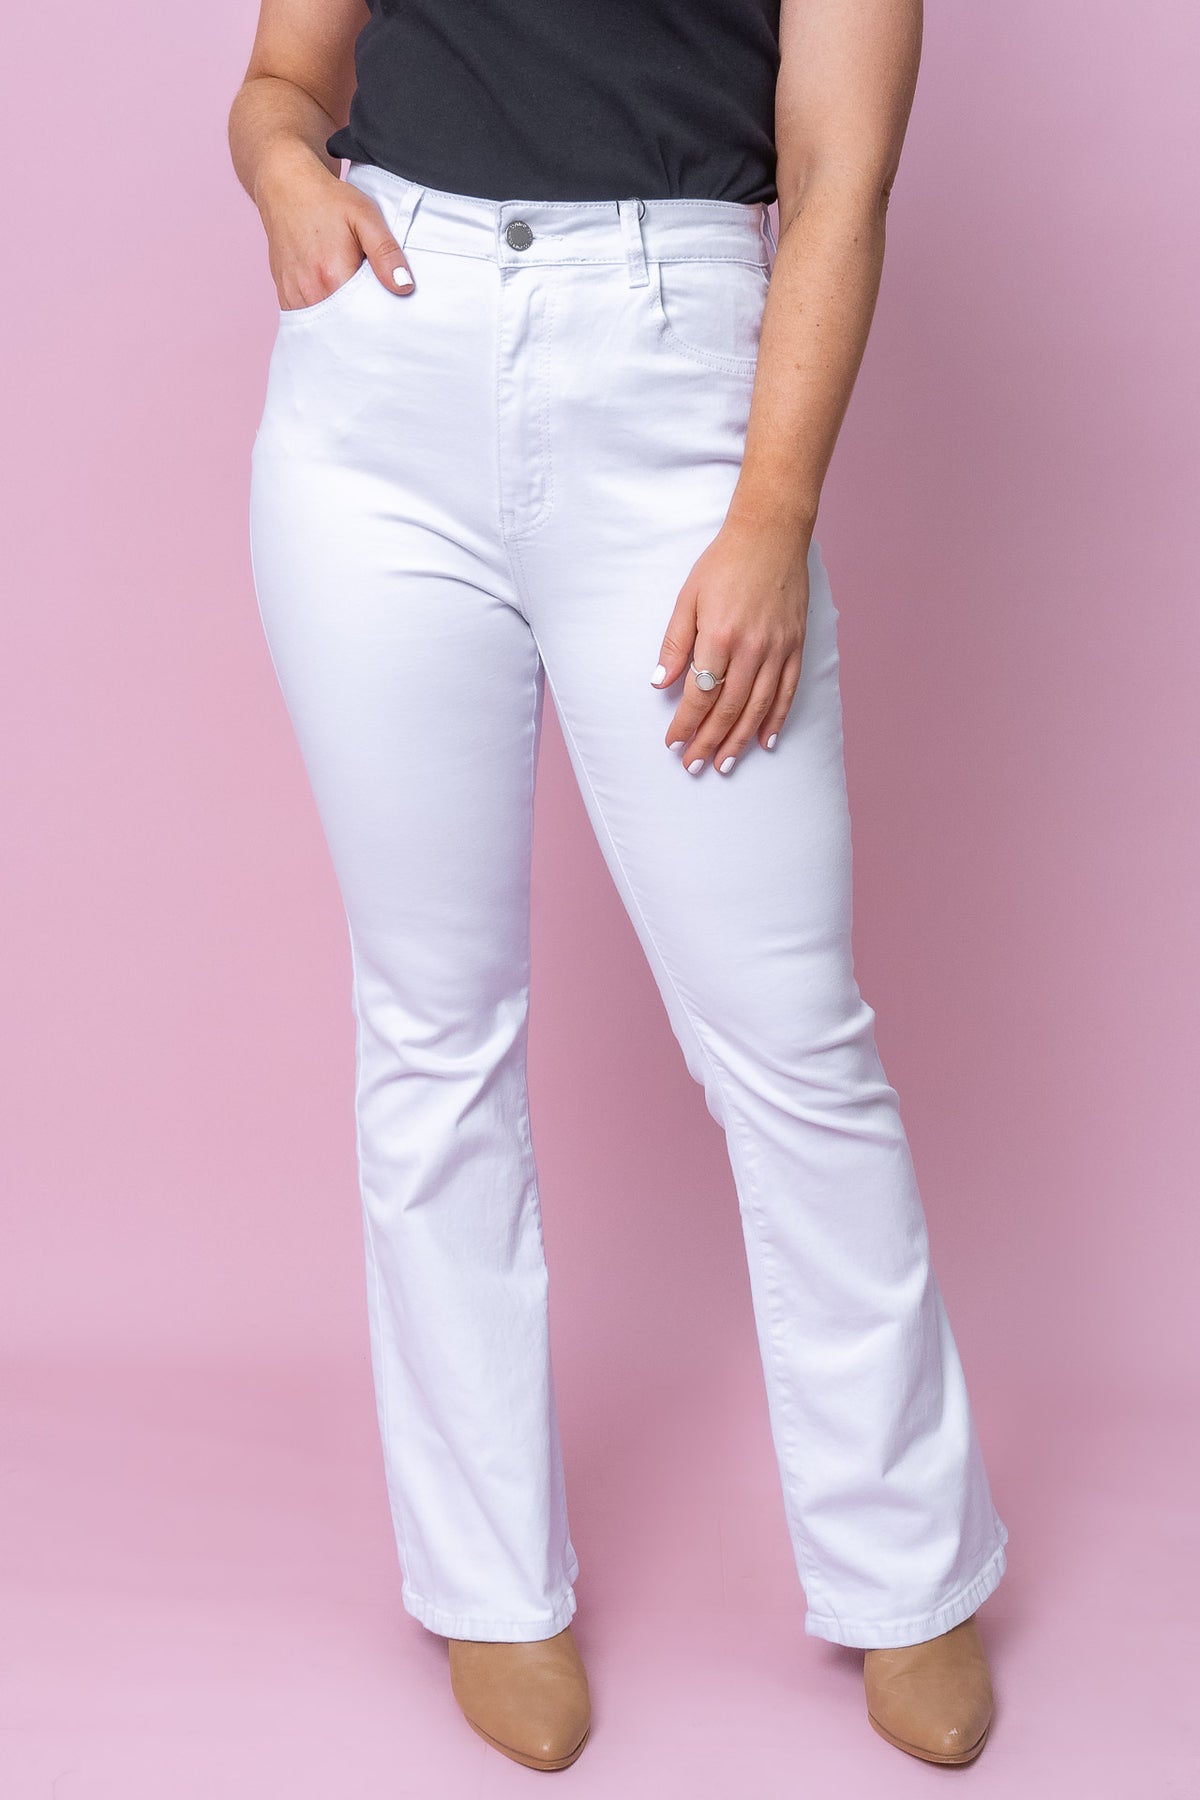 Huxley Jeans in White